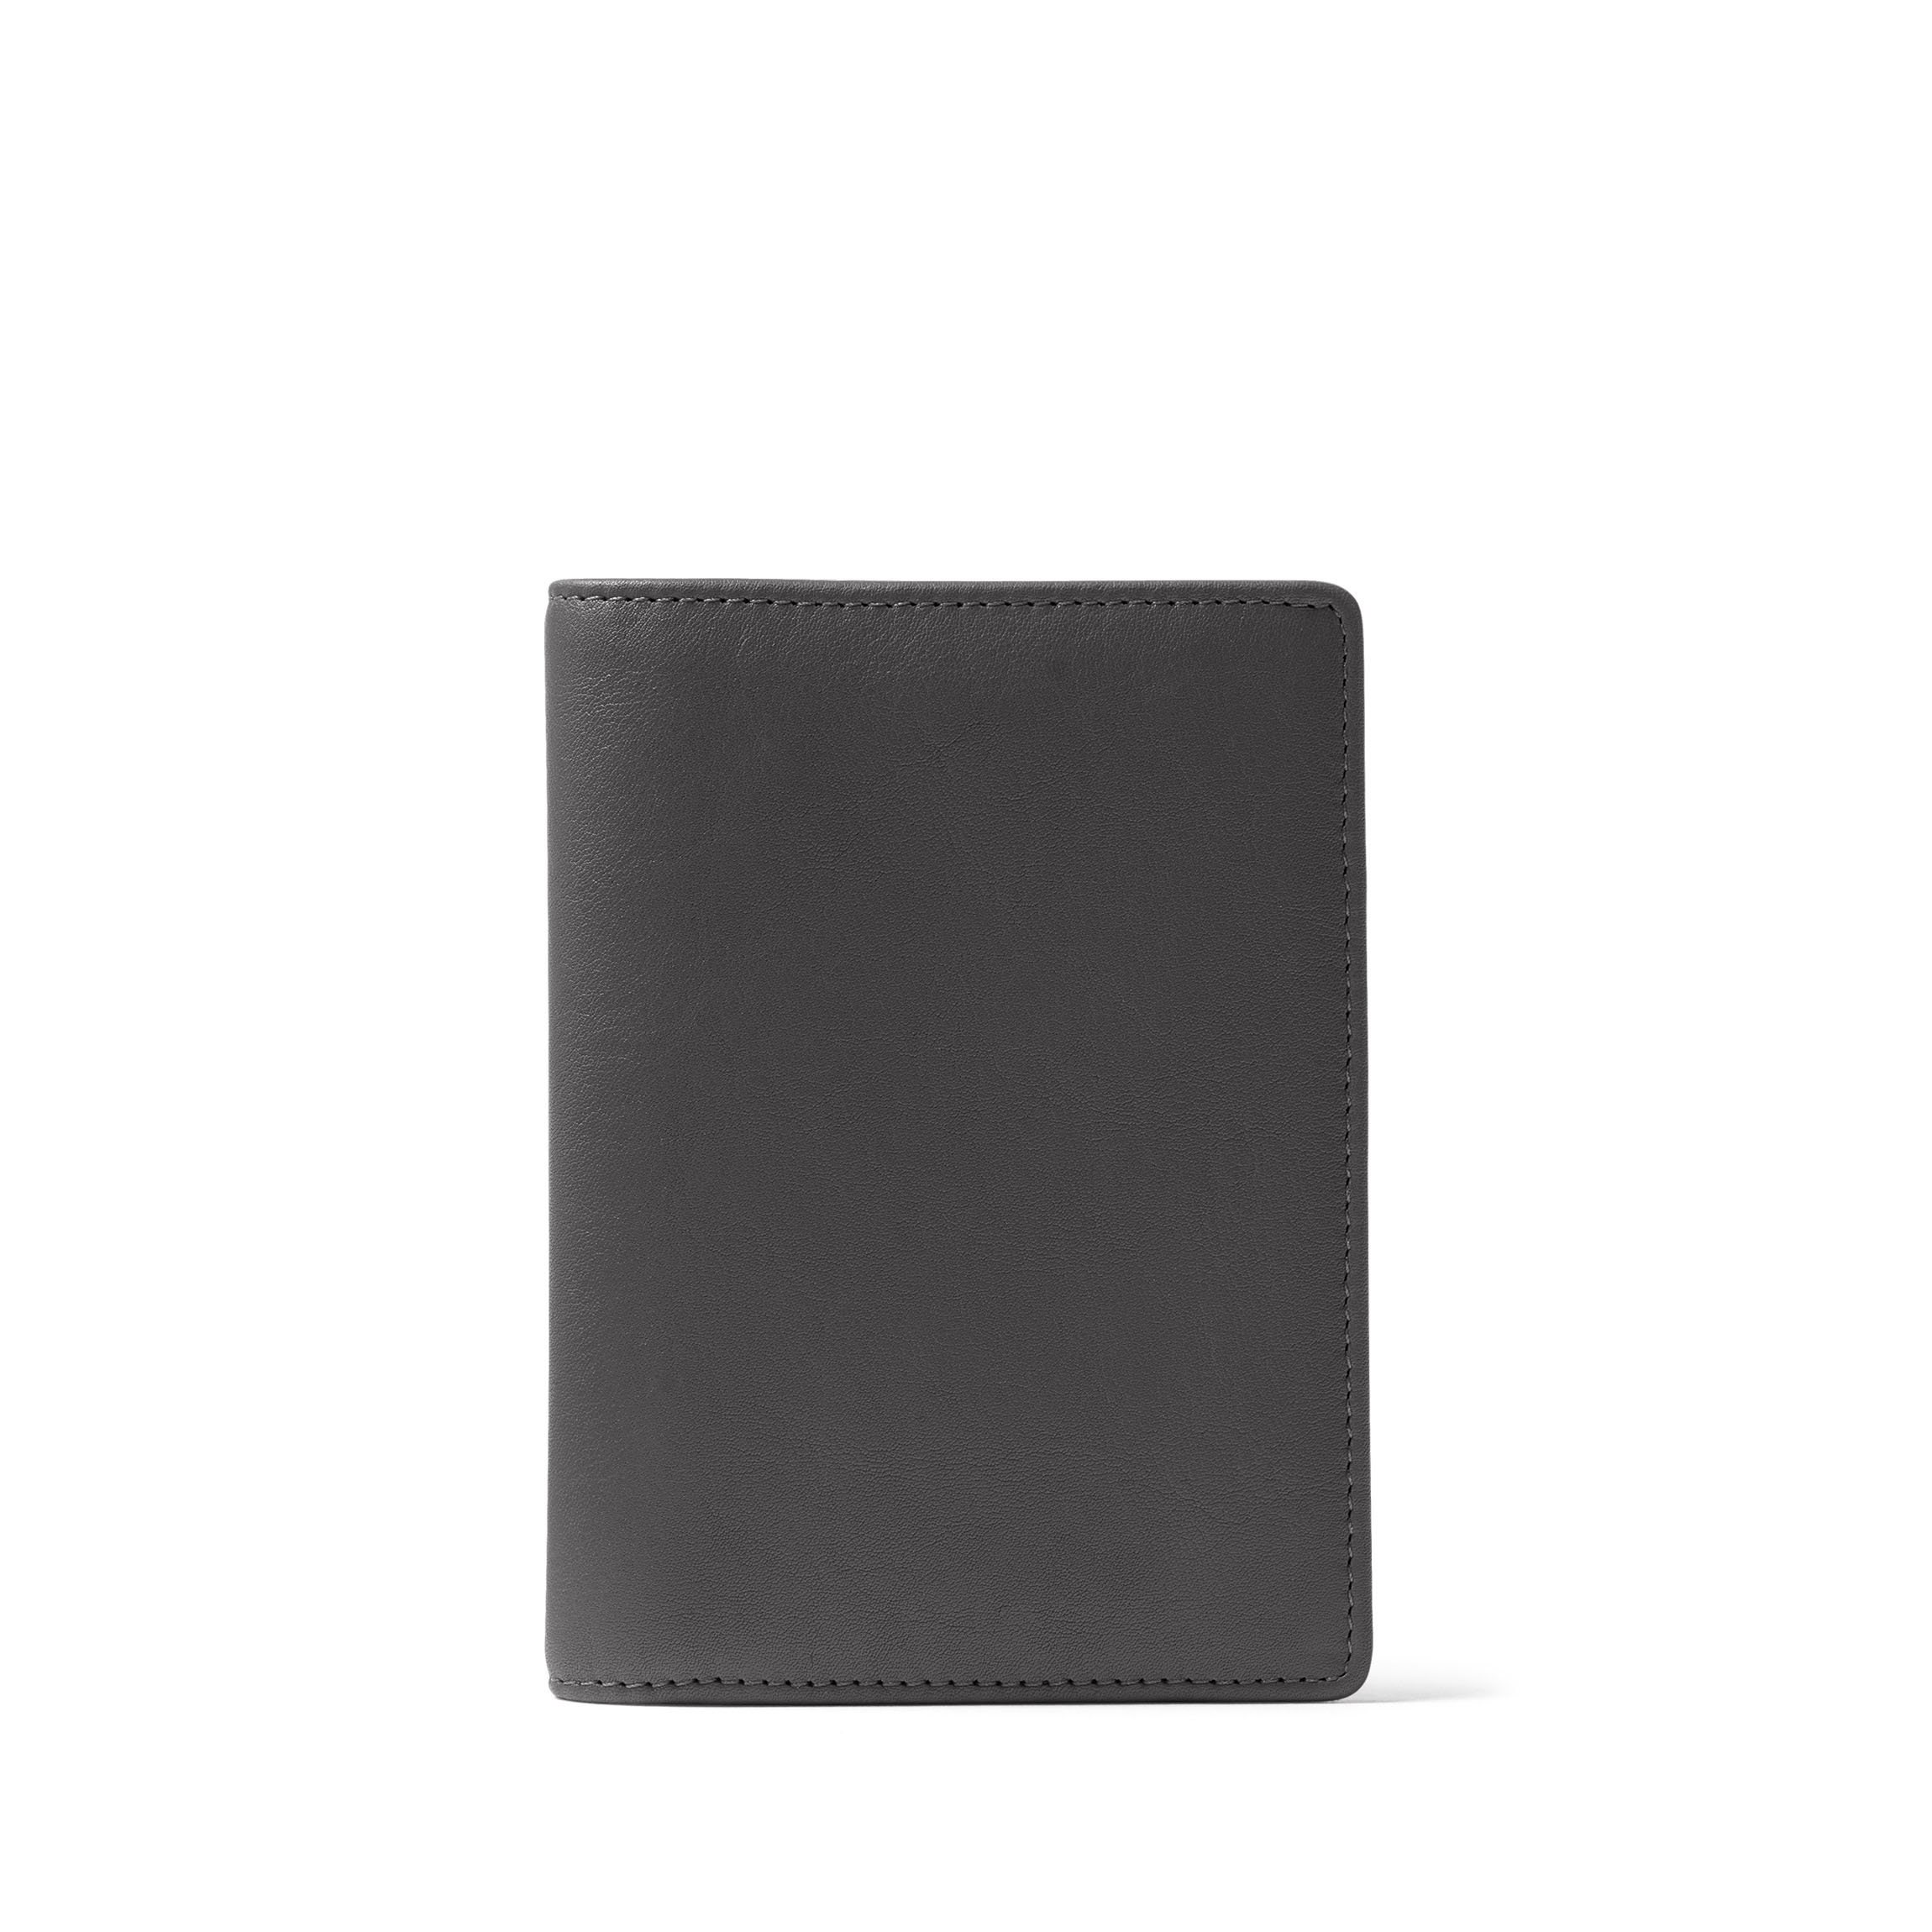 Leatherology Black Oil Deluxe Passport Cover 